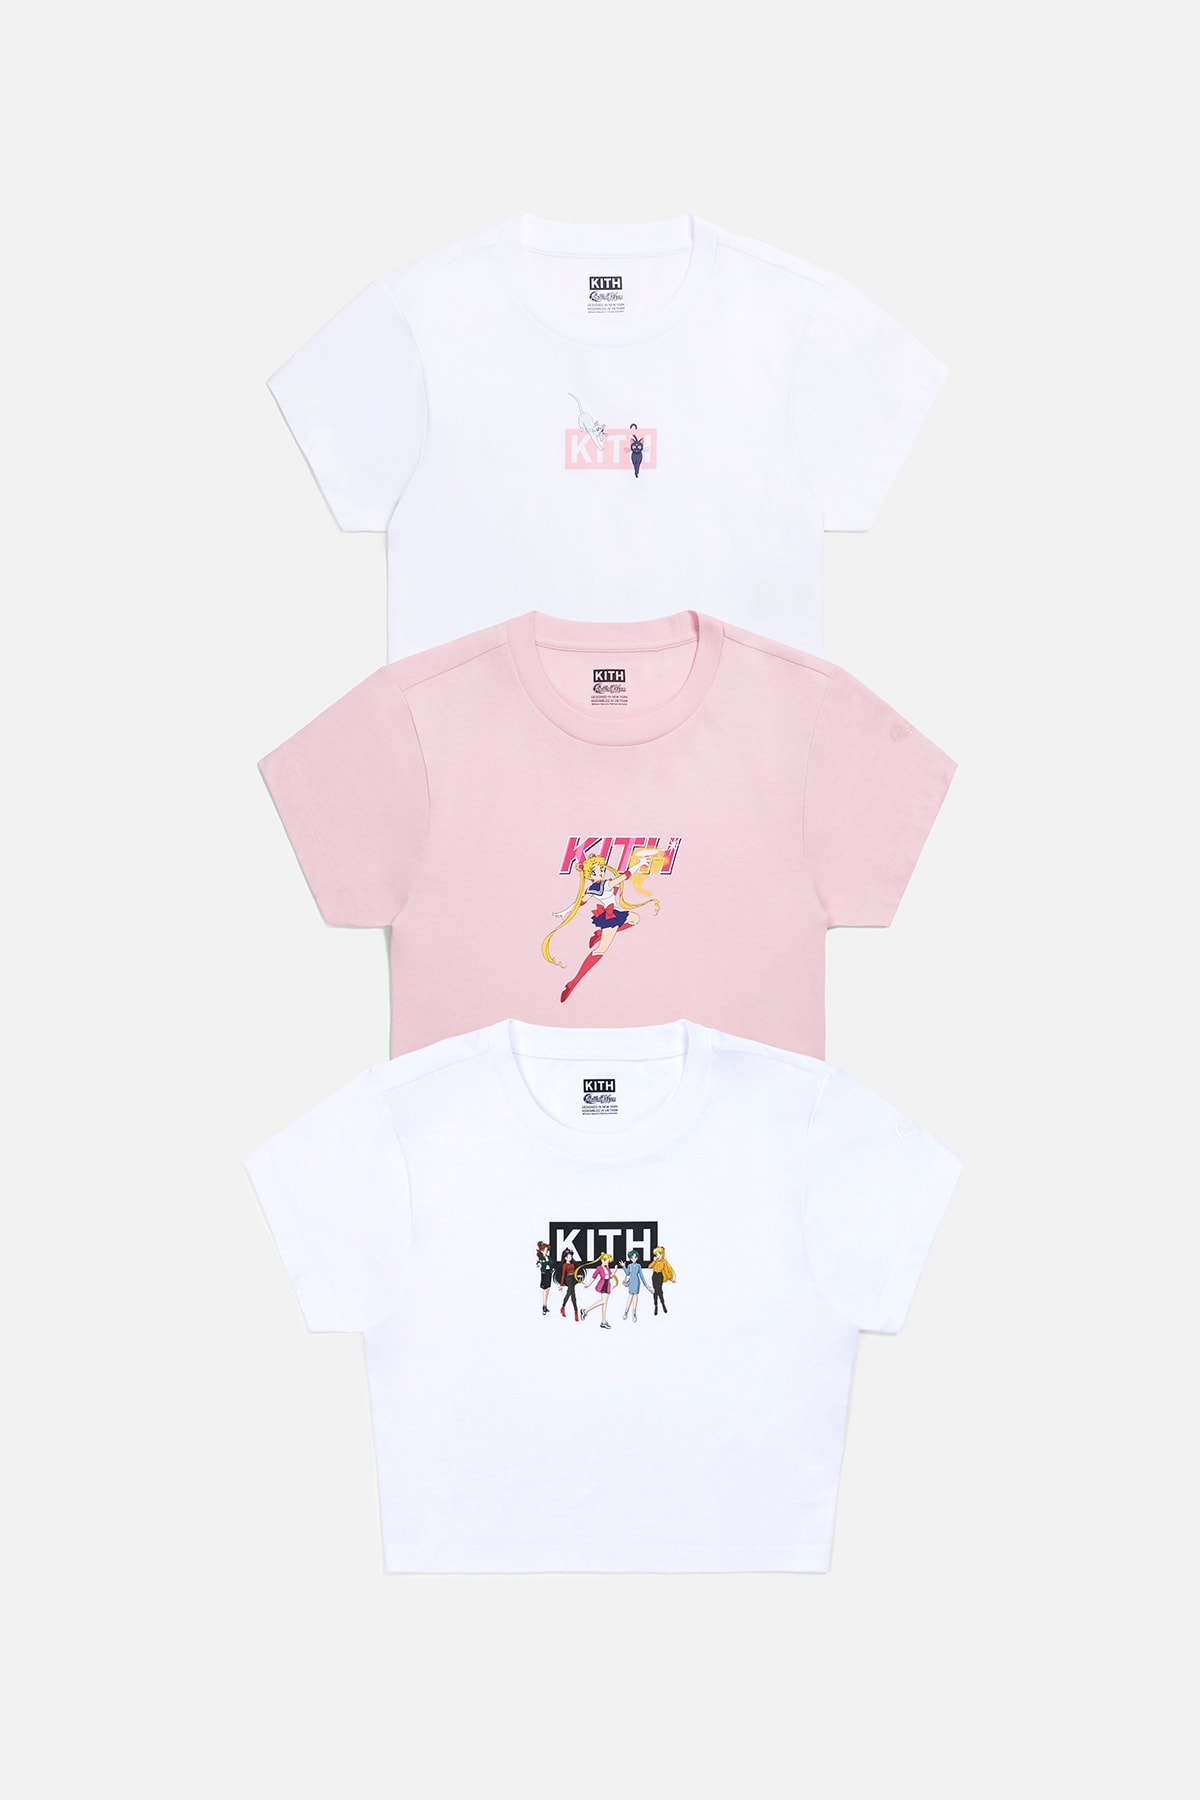 Sailor Moon x KITH Women Collaboration Collection T-Shirt Pink White